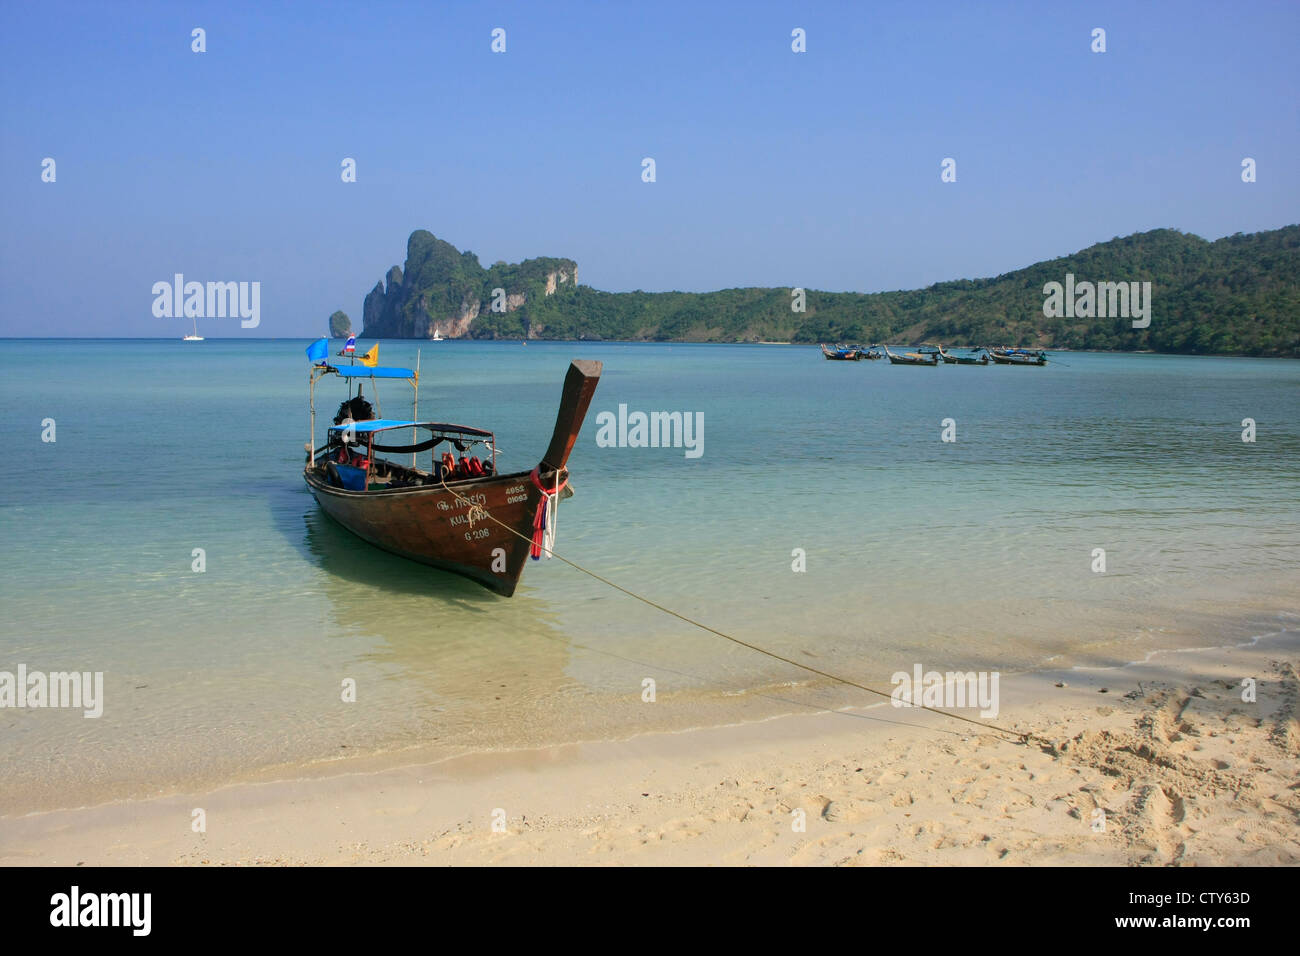 Longtail boat at the beach, Phi Phi Don island, Thailand Stock Photo